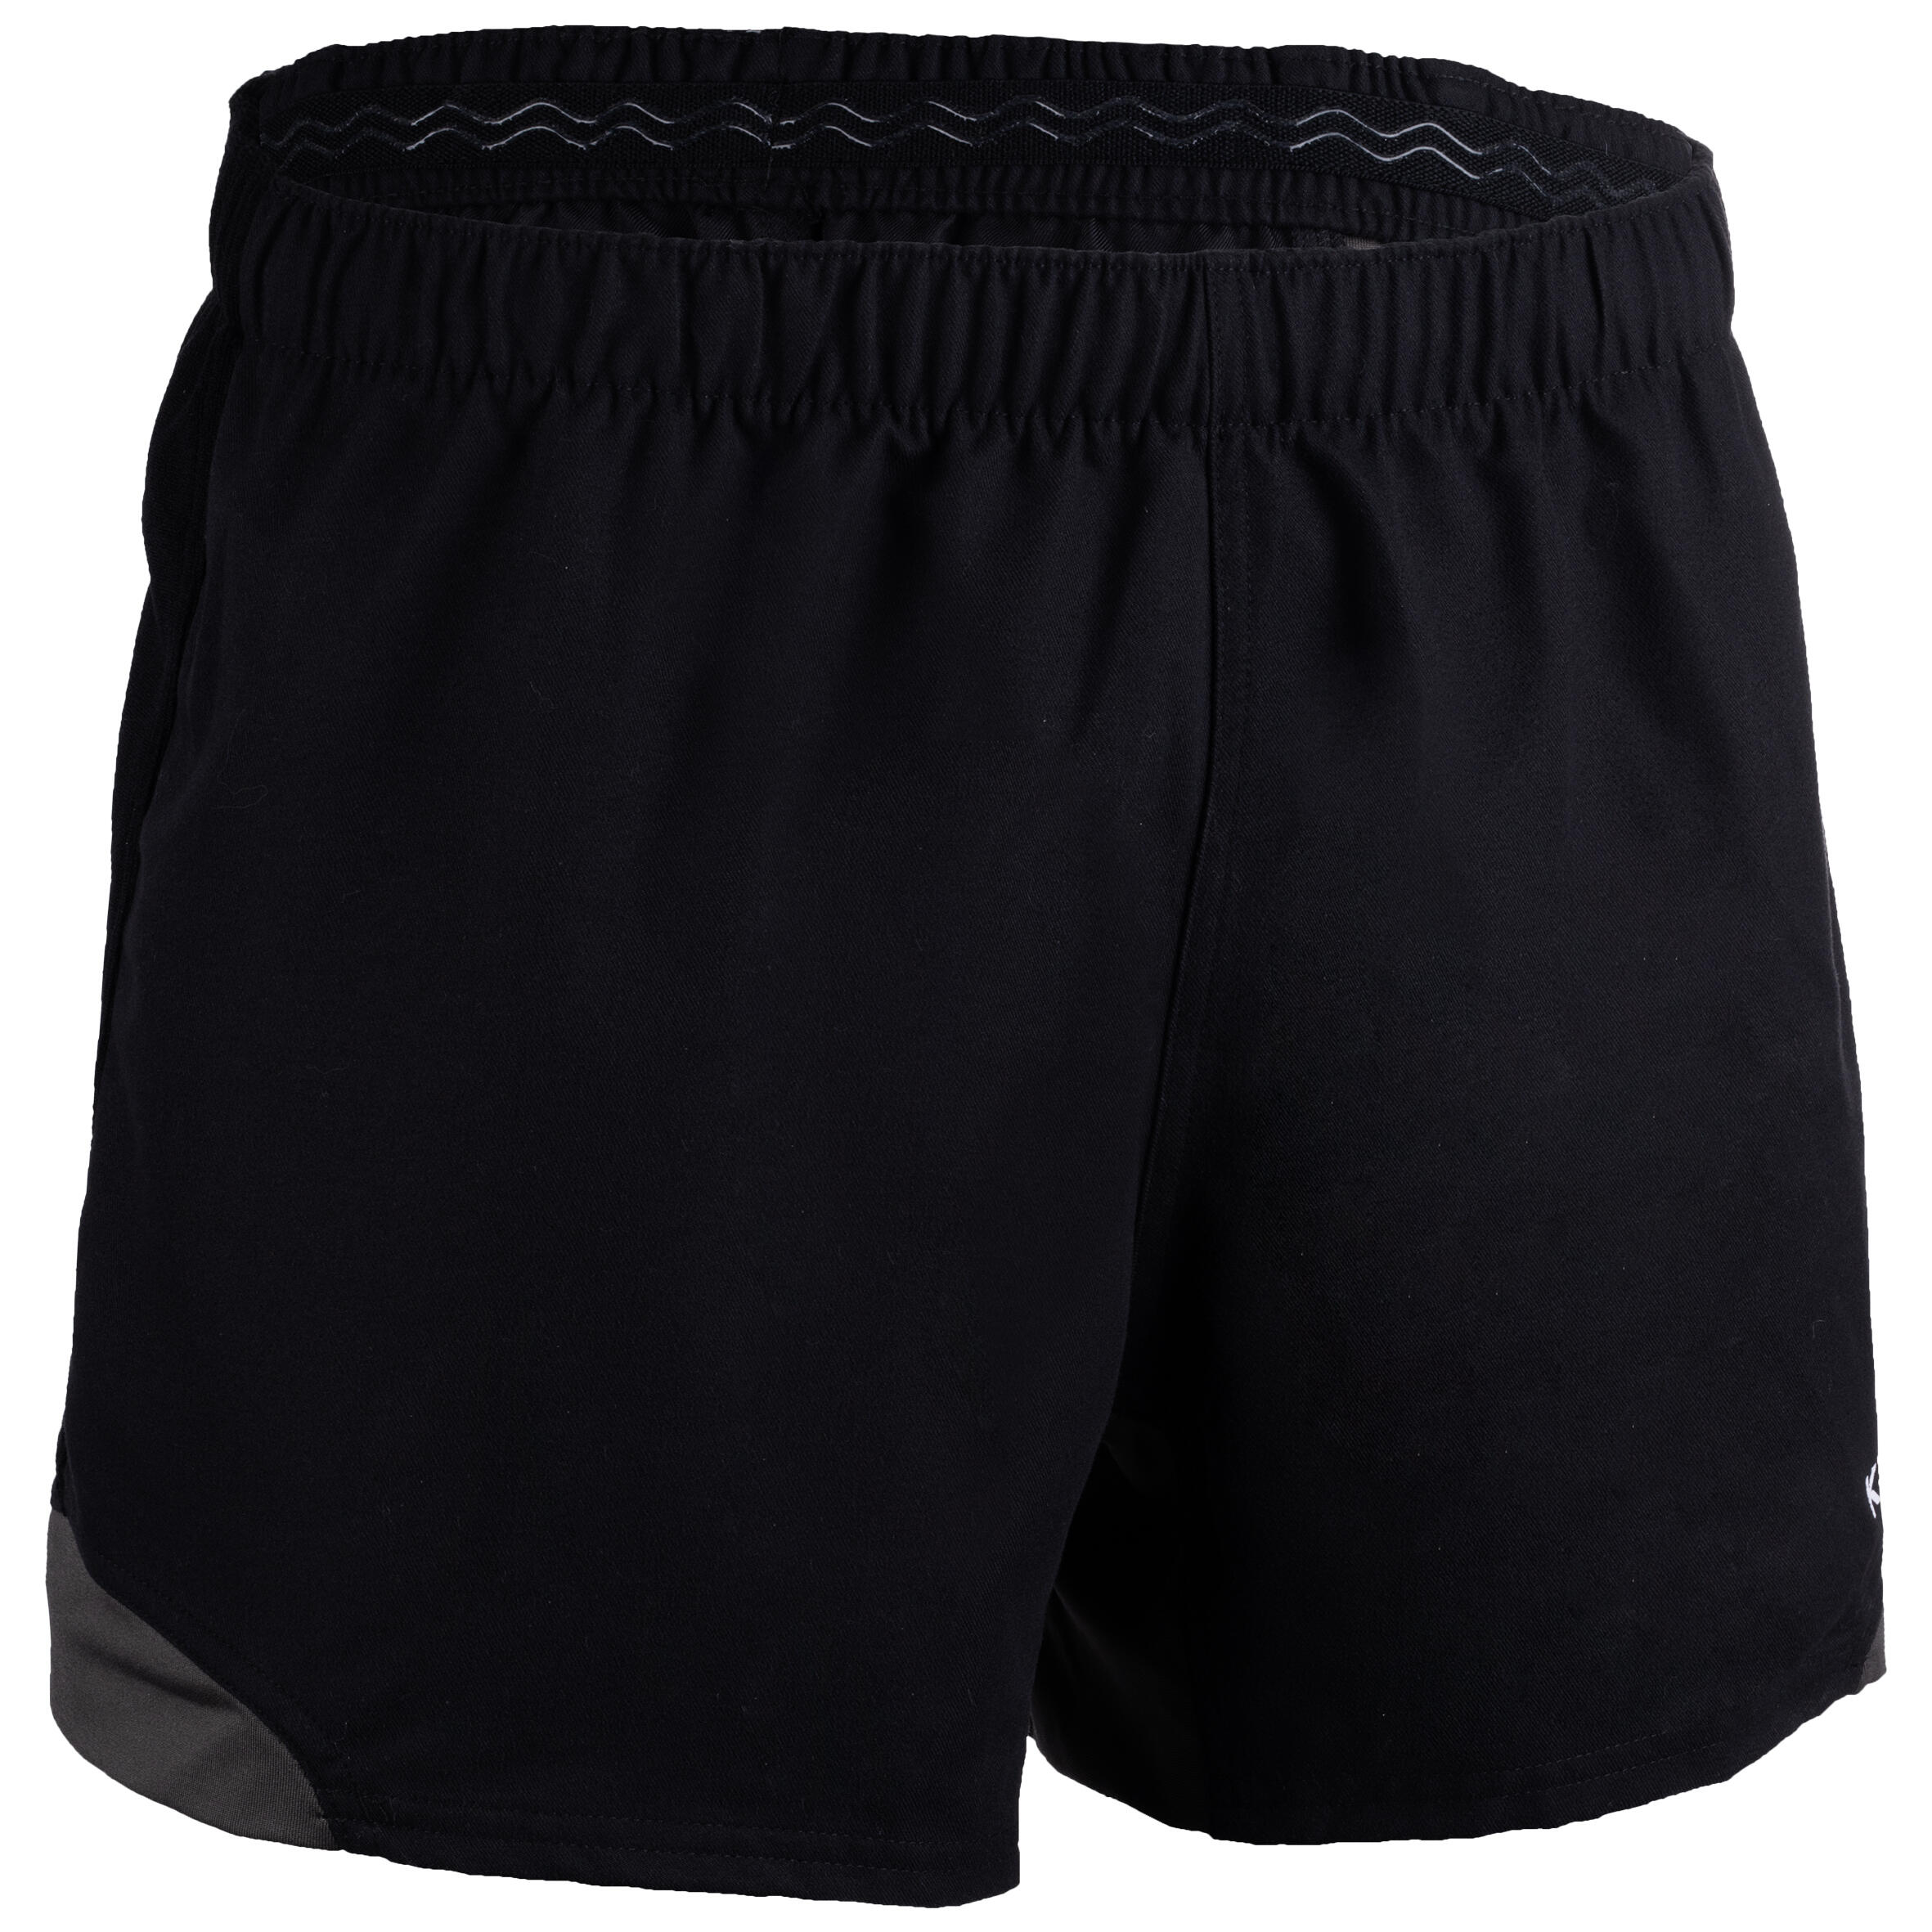 OFFLOAD Adult Rugby Shorts R900 - Black/Grey